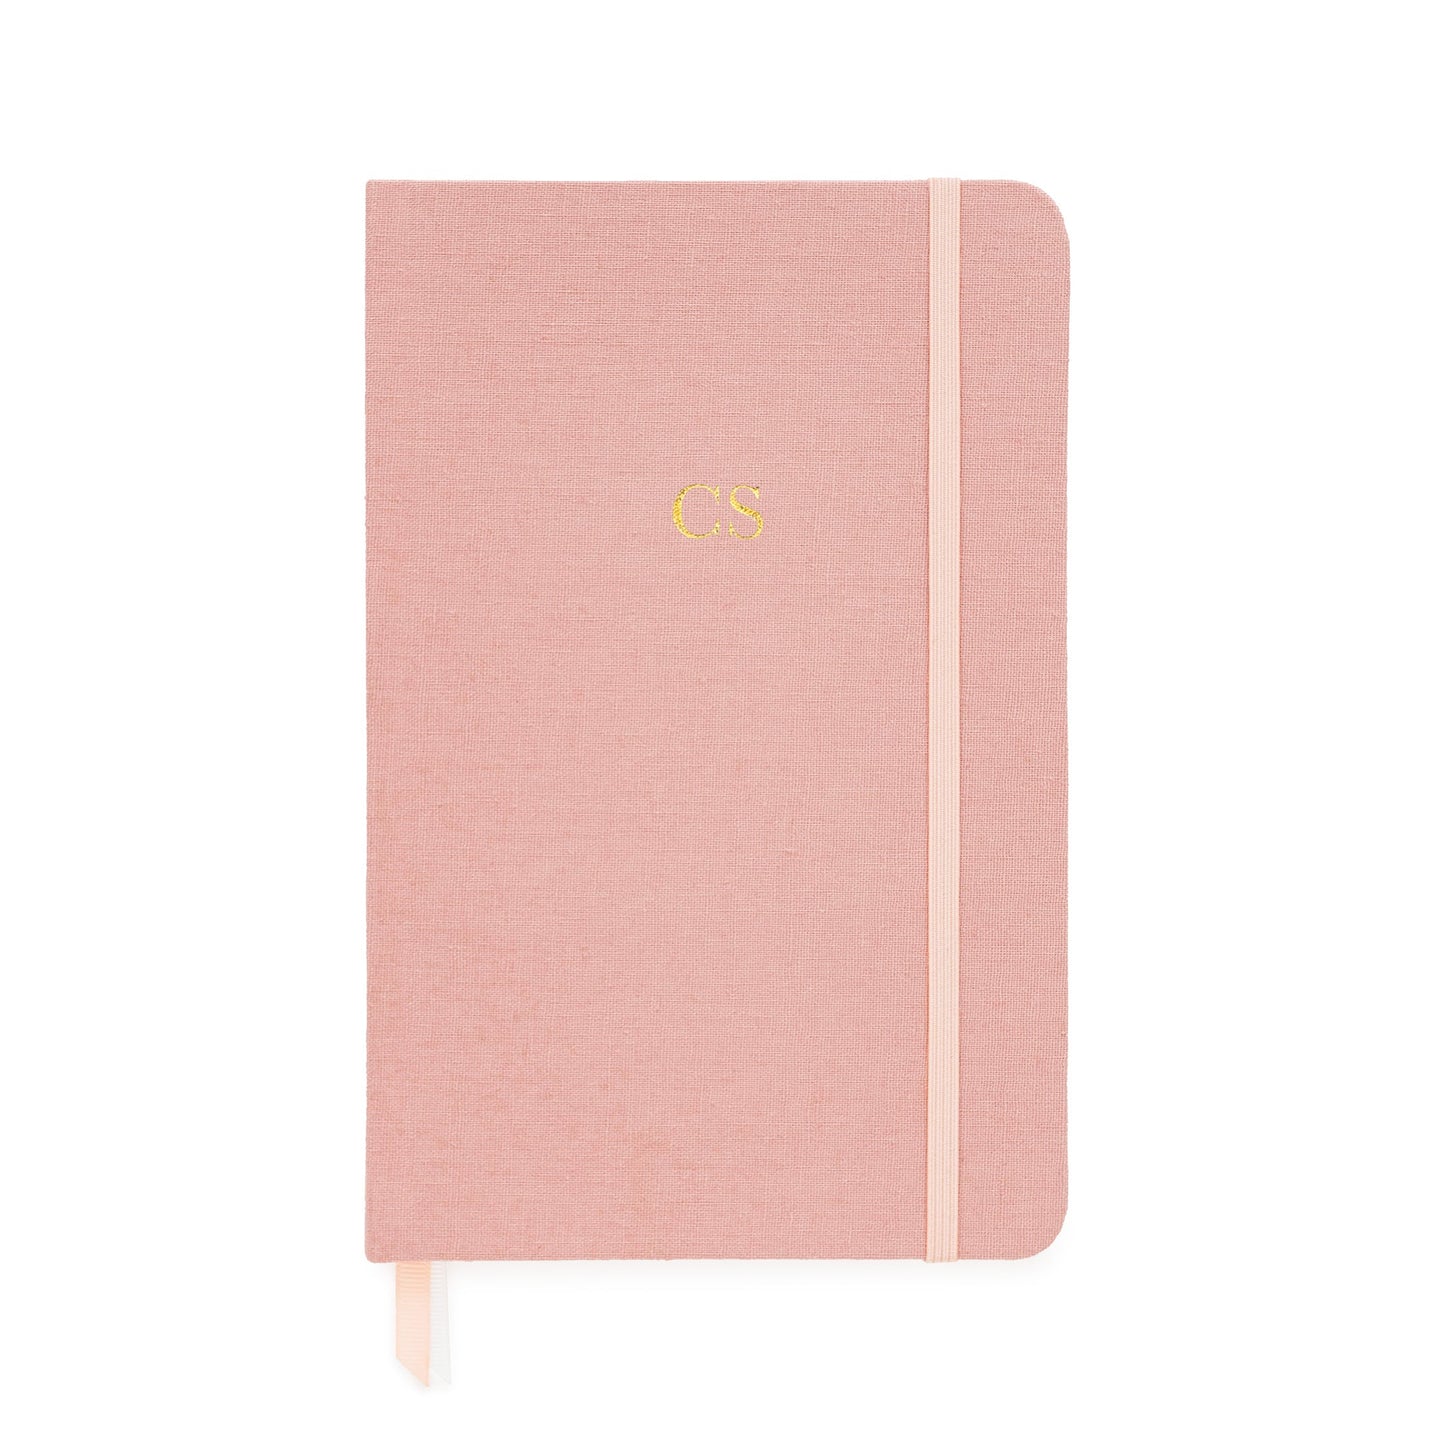 Rose fabric journal with gold monogram